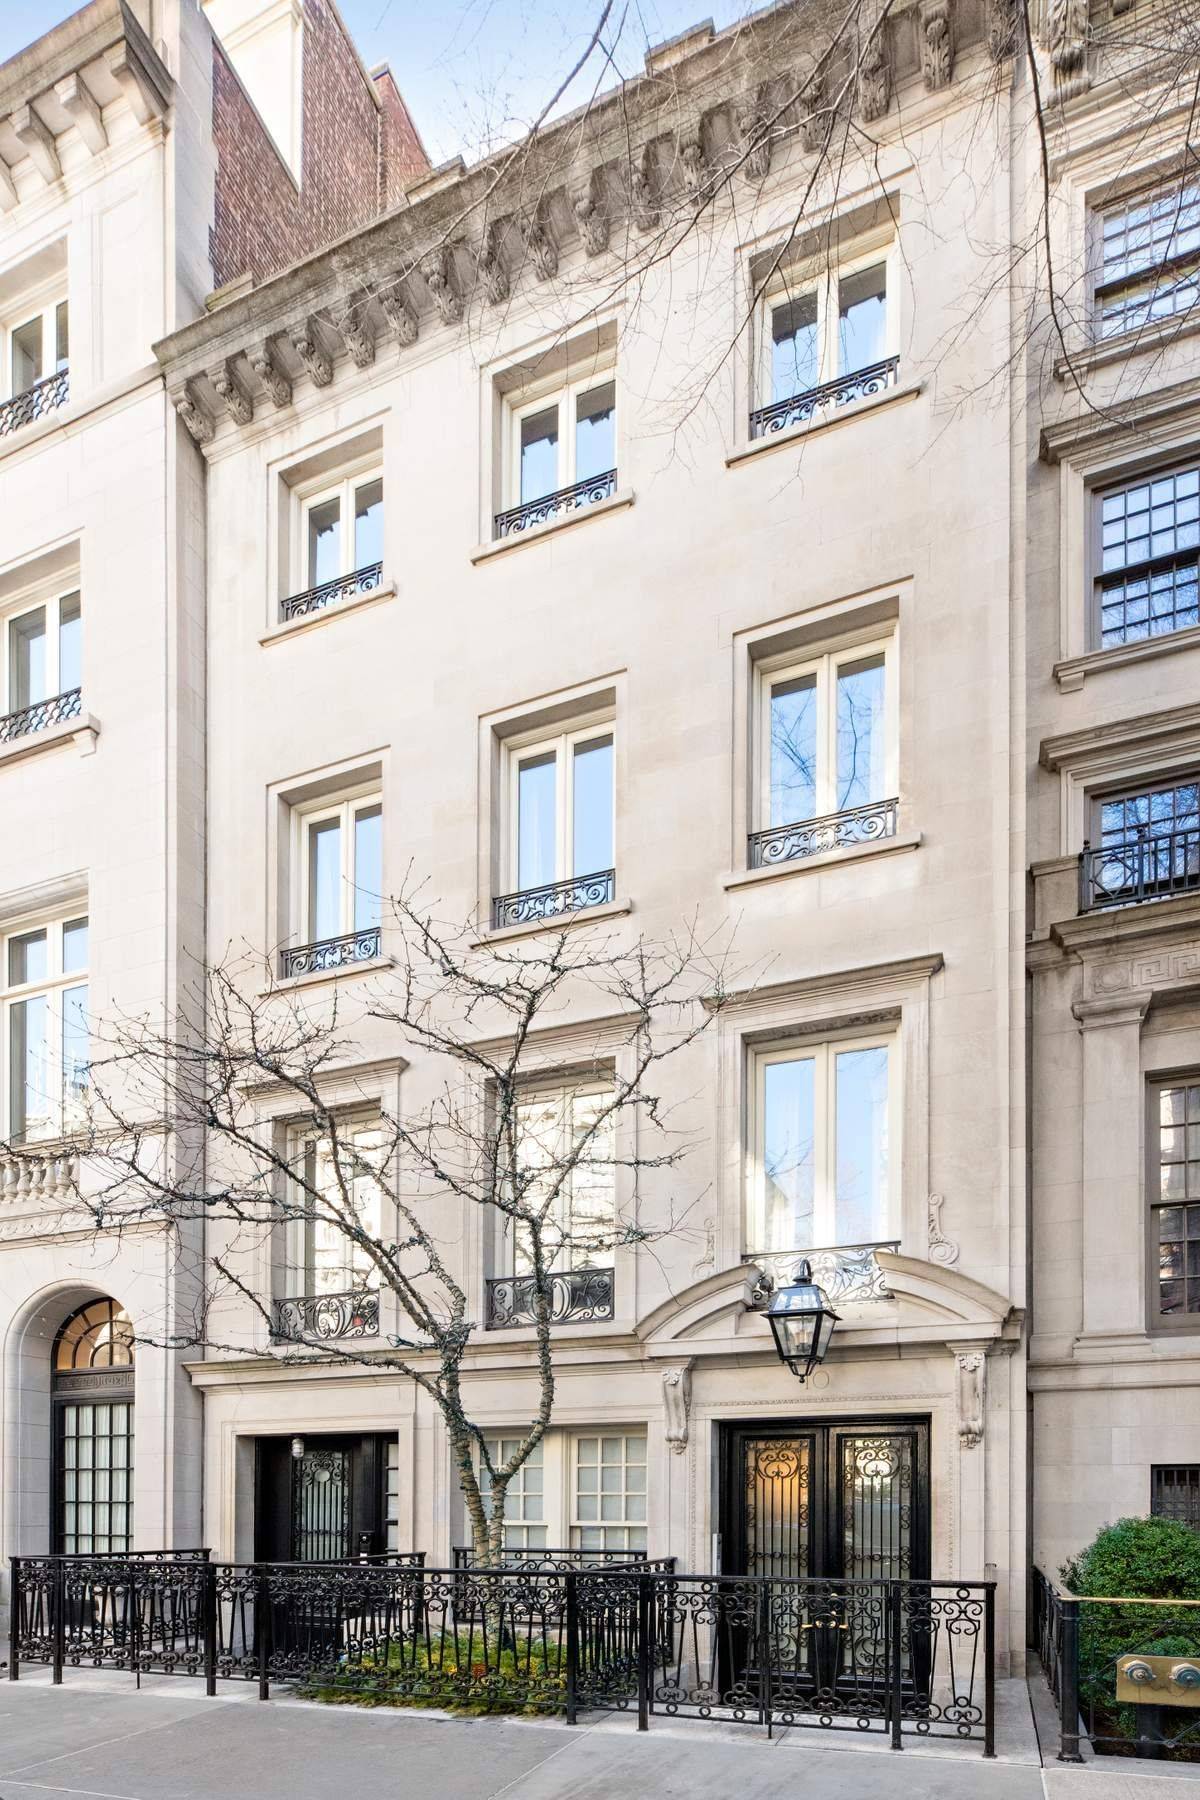 Perfectly situated on one of the city's most prized blocks, this stunning limestone mansion is distinguished by its elegant yet restrained faA ade and fortuitous placement just off Fifth Avenue.